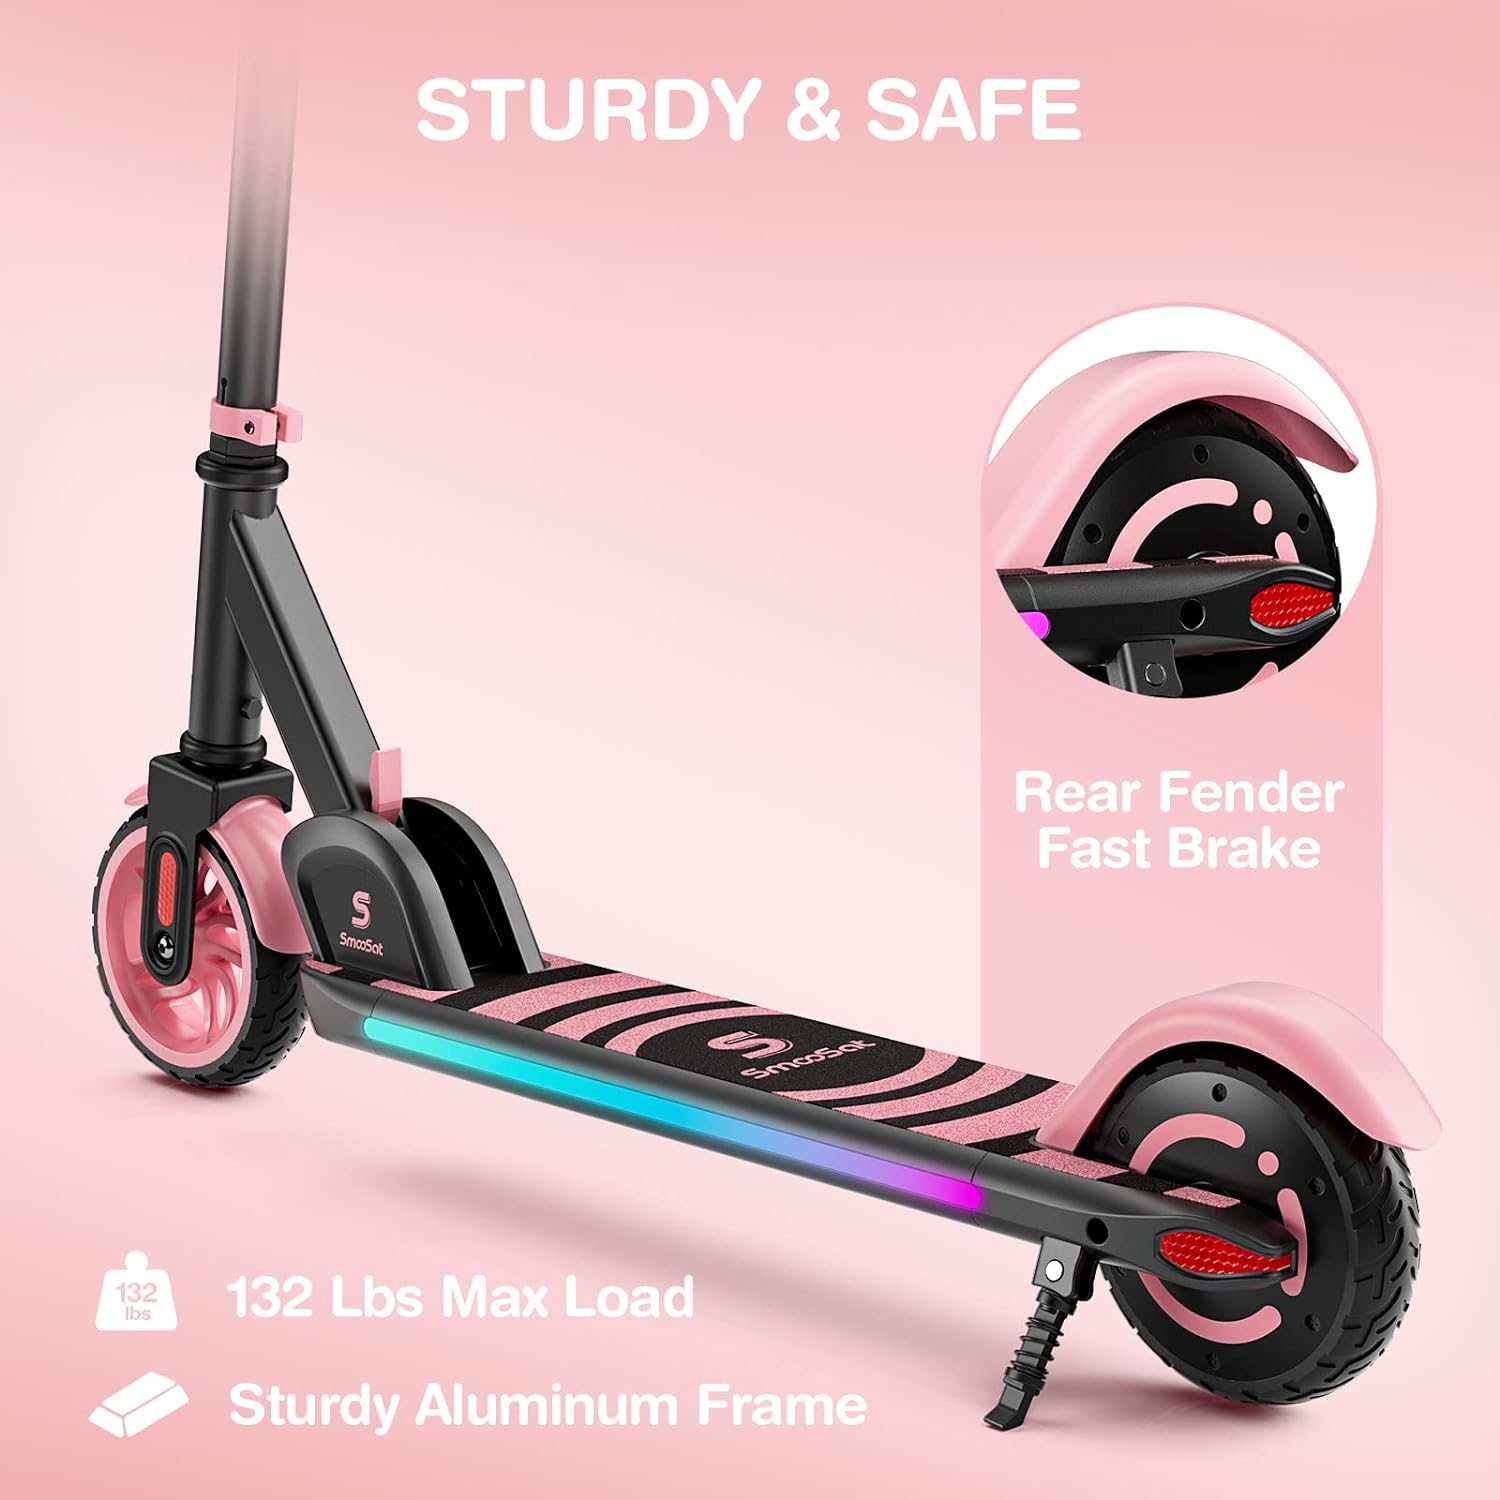 SmooSat Apex Electric Scooter for Kids: A Fun and Safe Ride